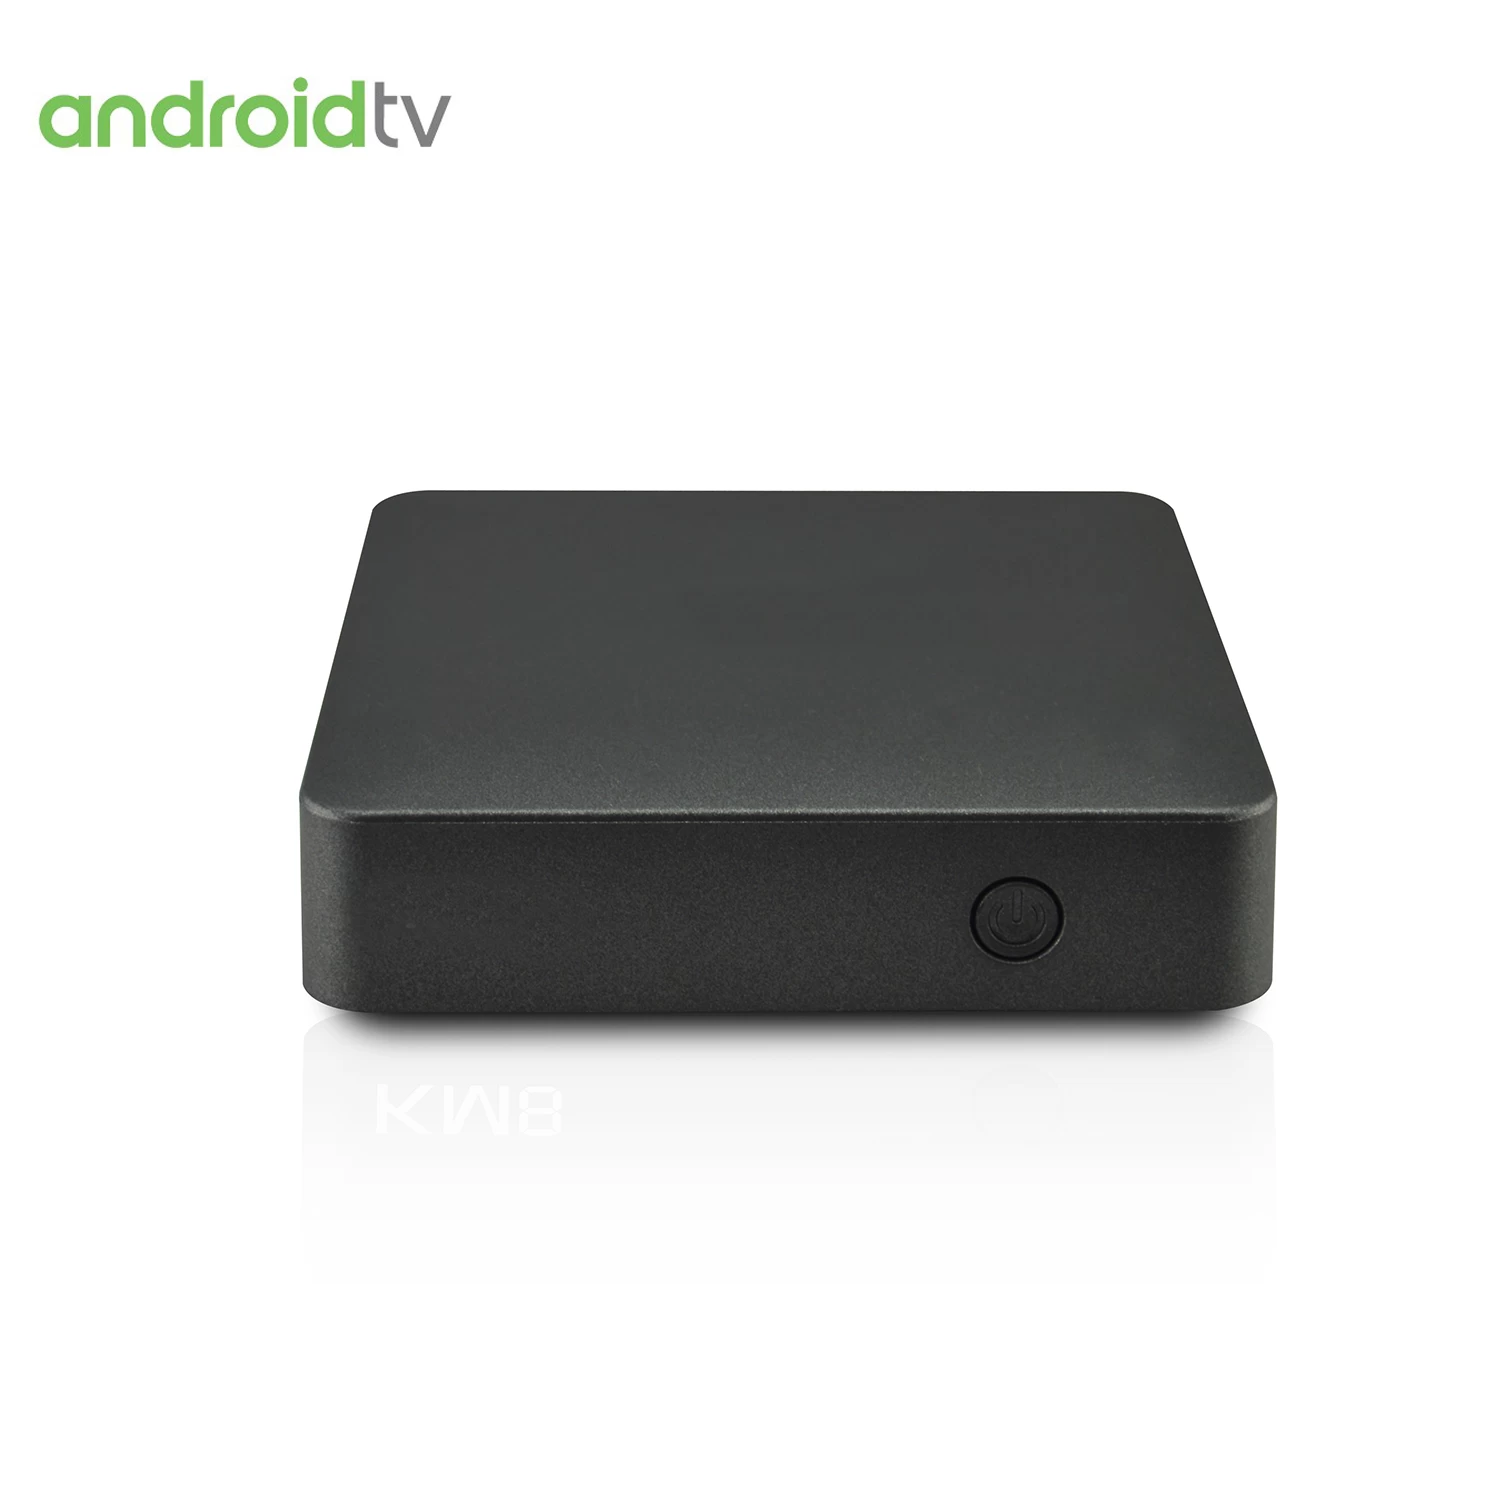 Google Assistant voice control coming to Android TV